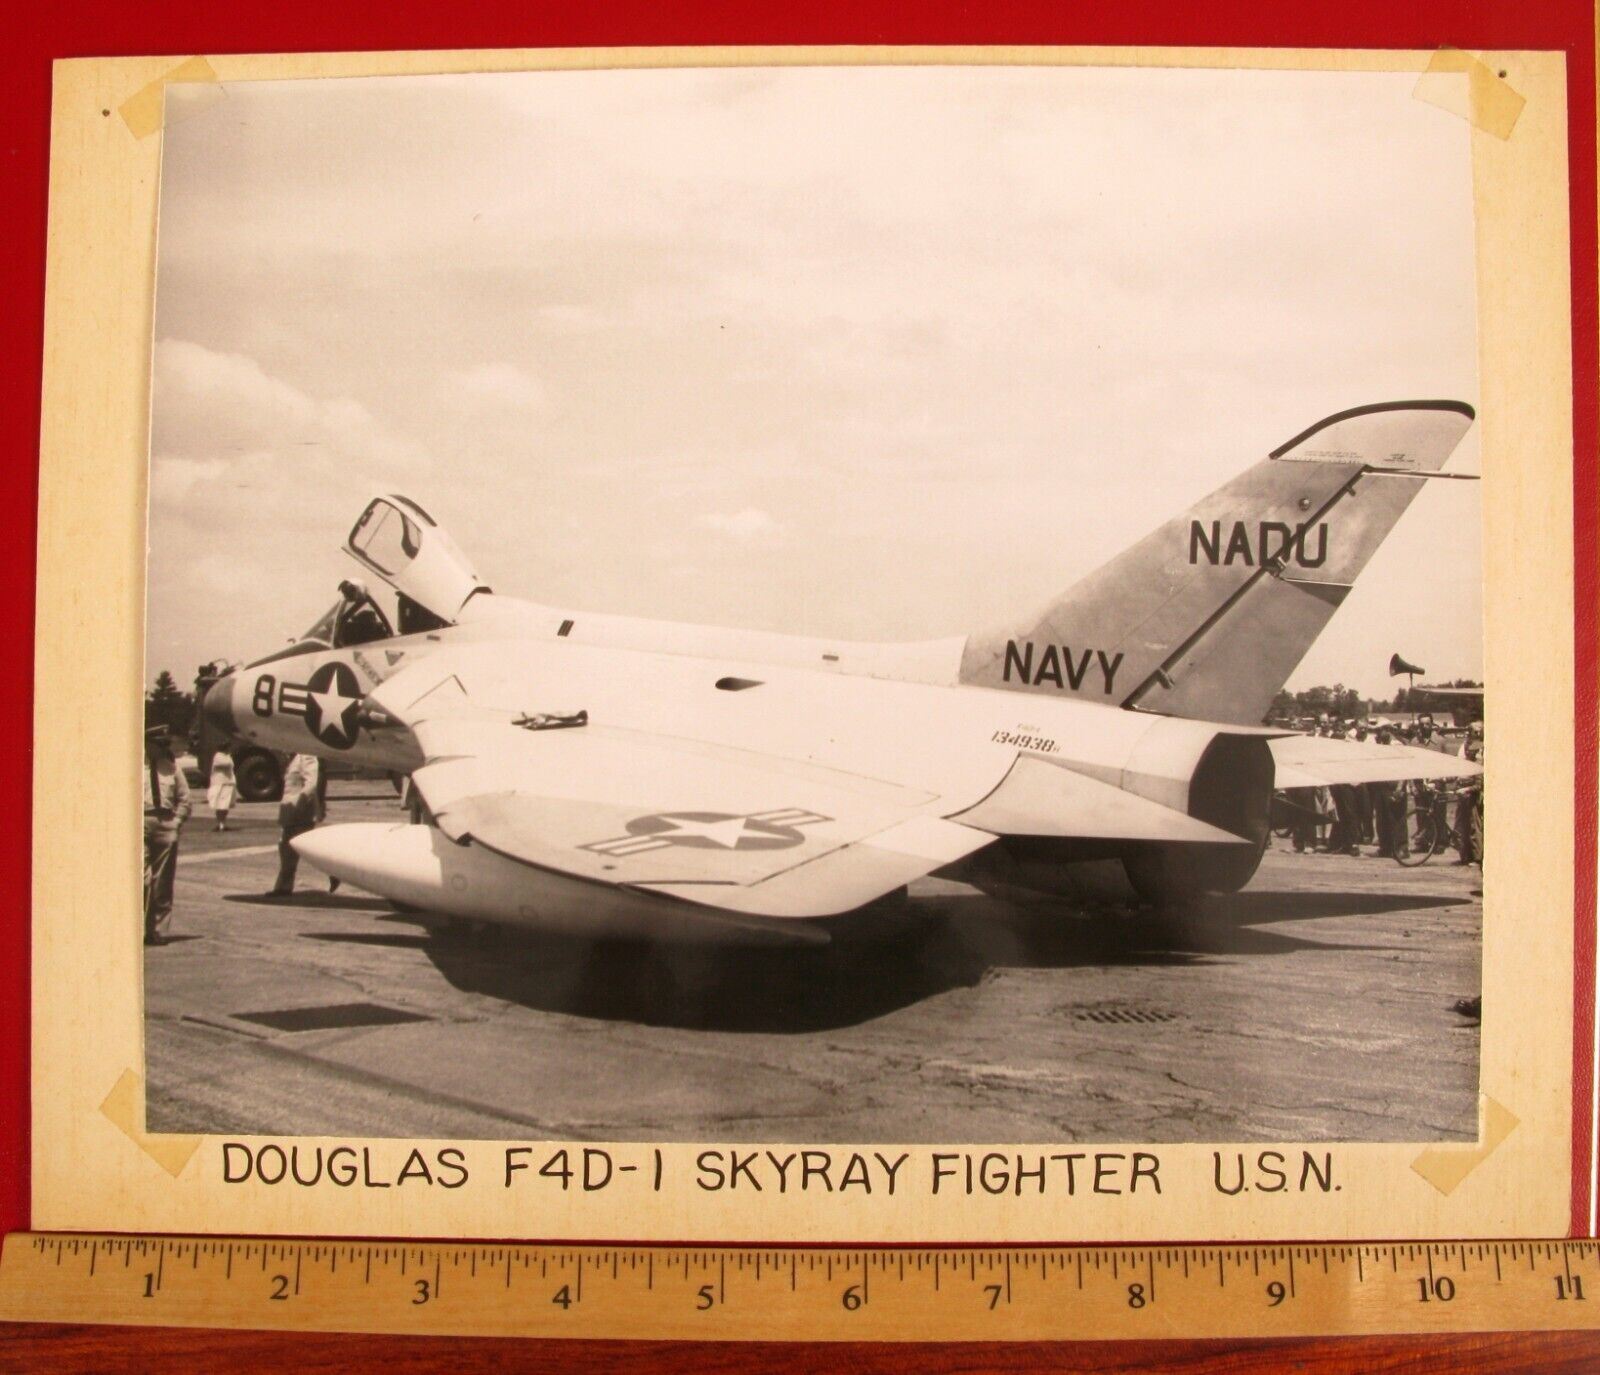 VINTAGE PHOTOGRAPH DOUGLAS F4D-1 SKYRAY FIGHTER US NAVY USN MILITARY AIRPLANE 